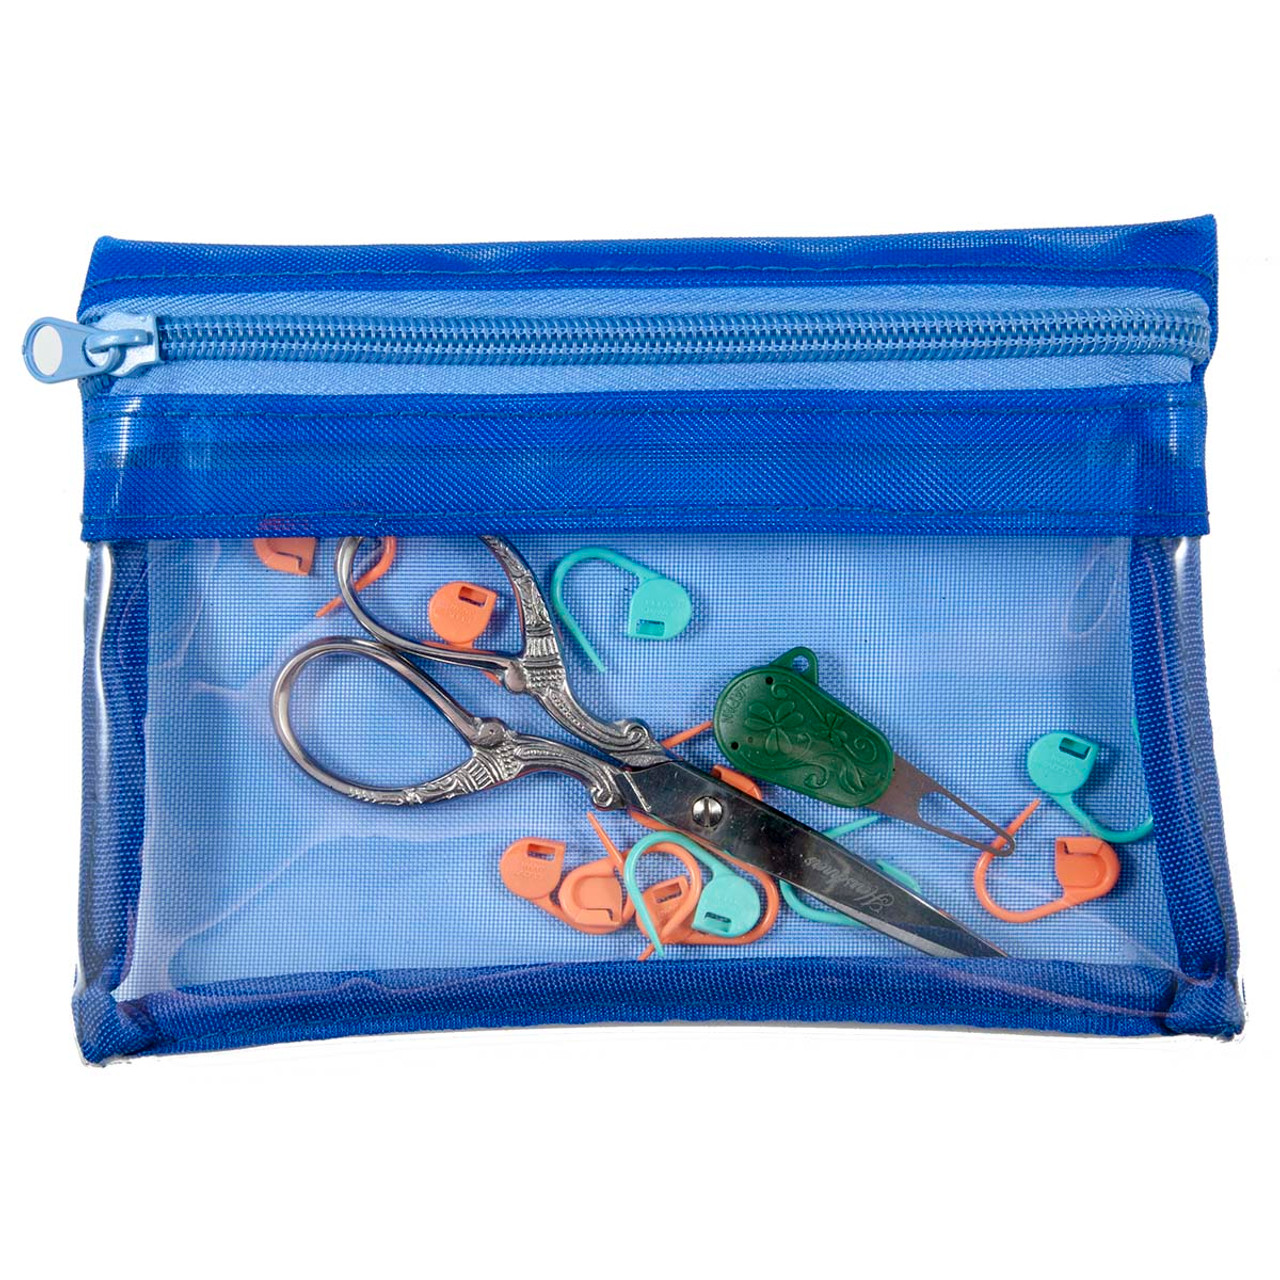 Extra Small Clear Mesh Zipper Pouch (5.38 x 7.38) - Buy Now